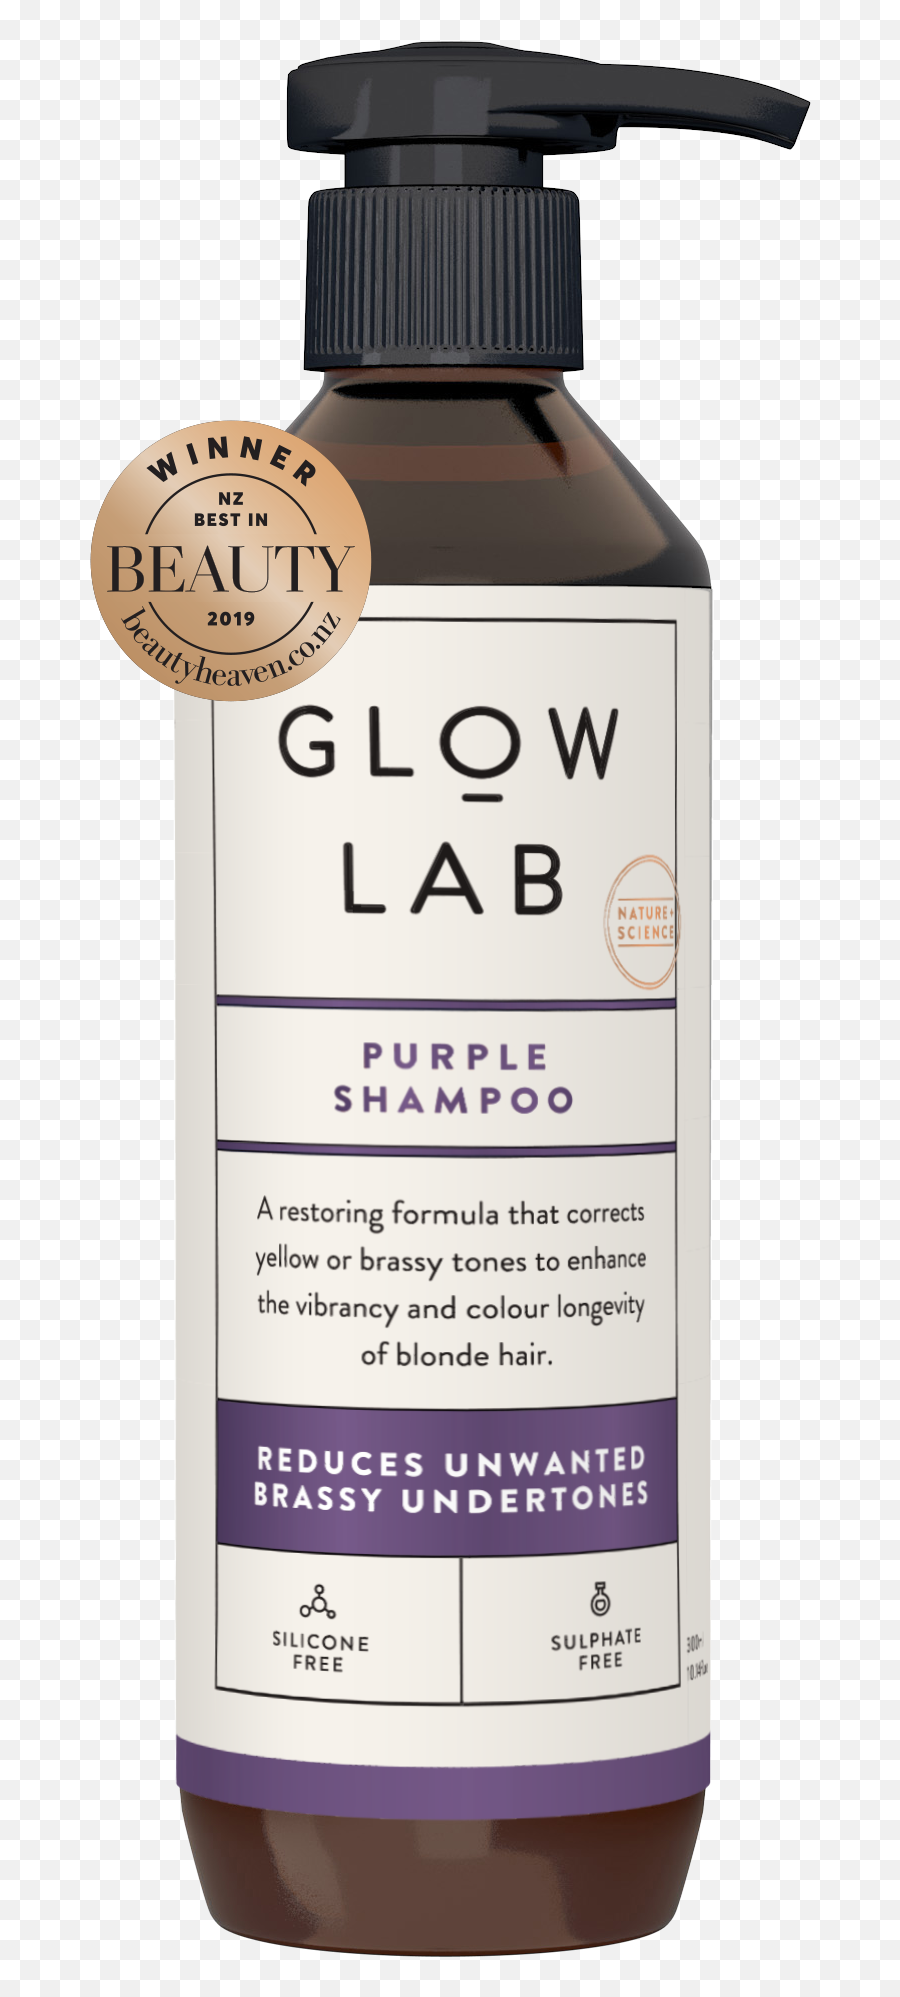 Welcome To Glow Lab - Glow Lab Purple Shampoo Emoji,You're Basically A Houseplant With More Complicated Emotions